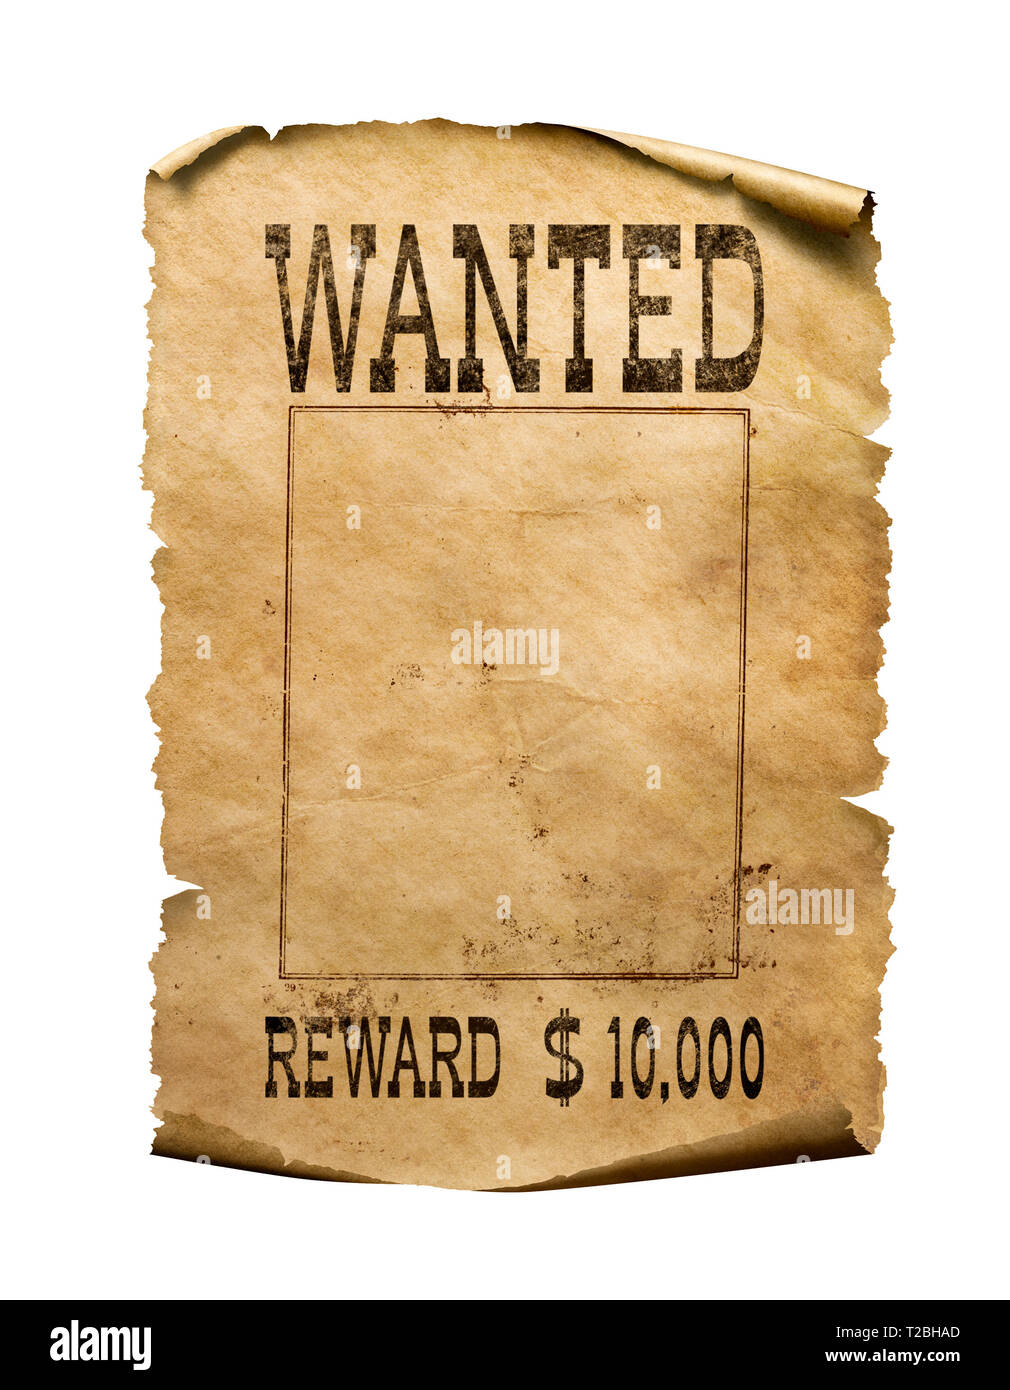 Wanted wild west poster on white background Stock Photo